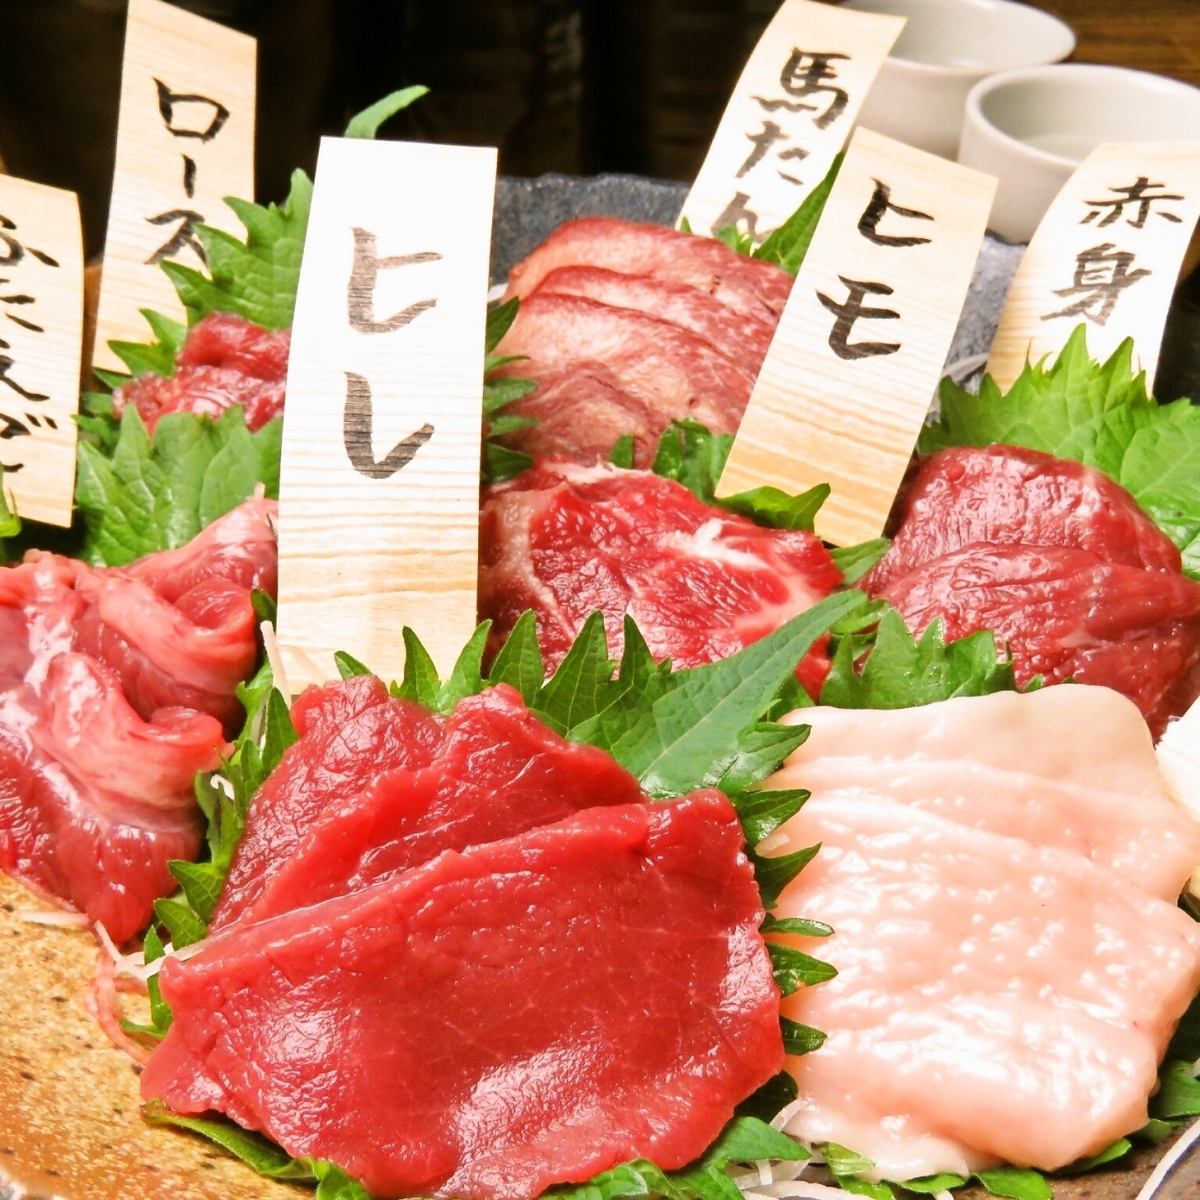 Near the station ☆ 5 minutes walk from the east exit! Enjoy fresh horse meat sent directly from Kumamoto every day